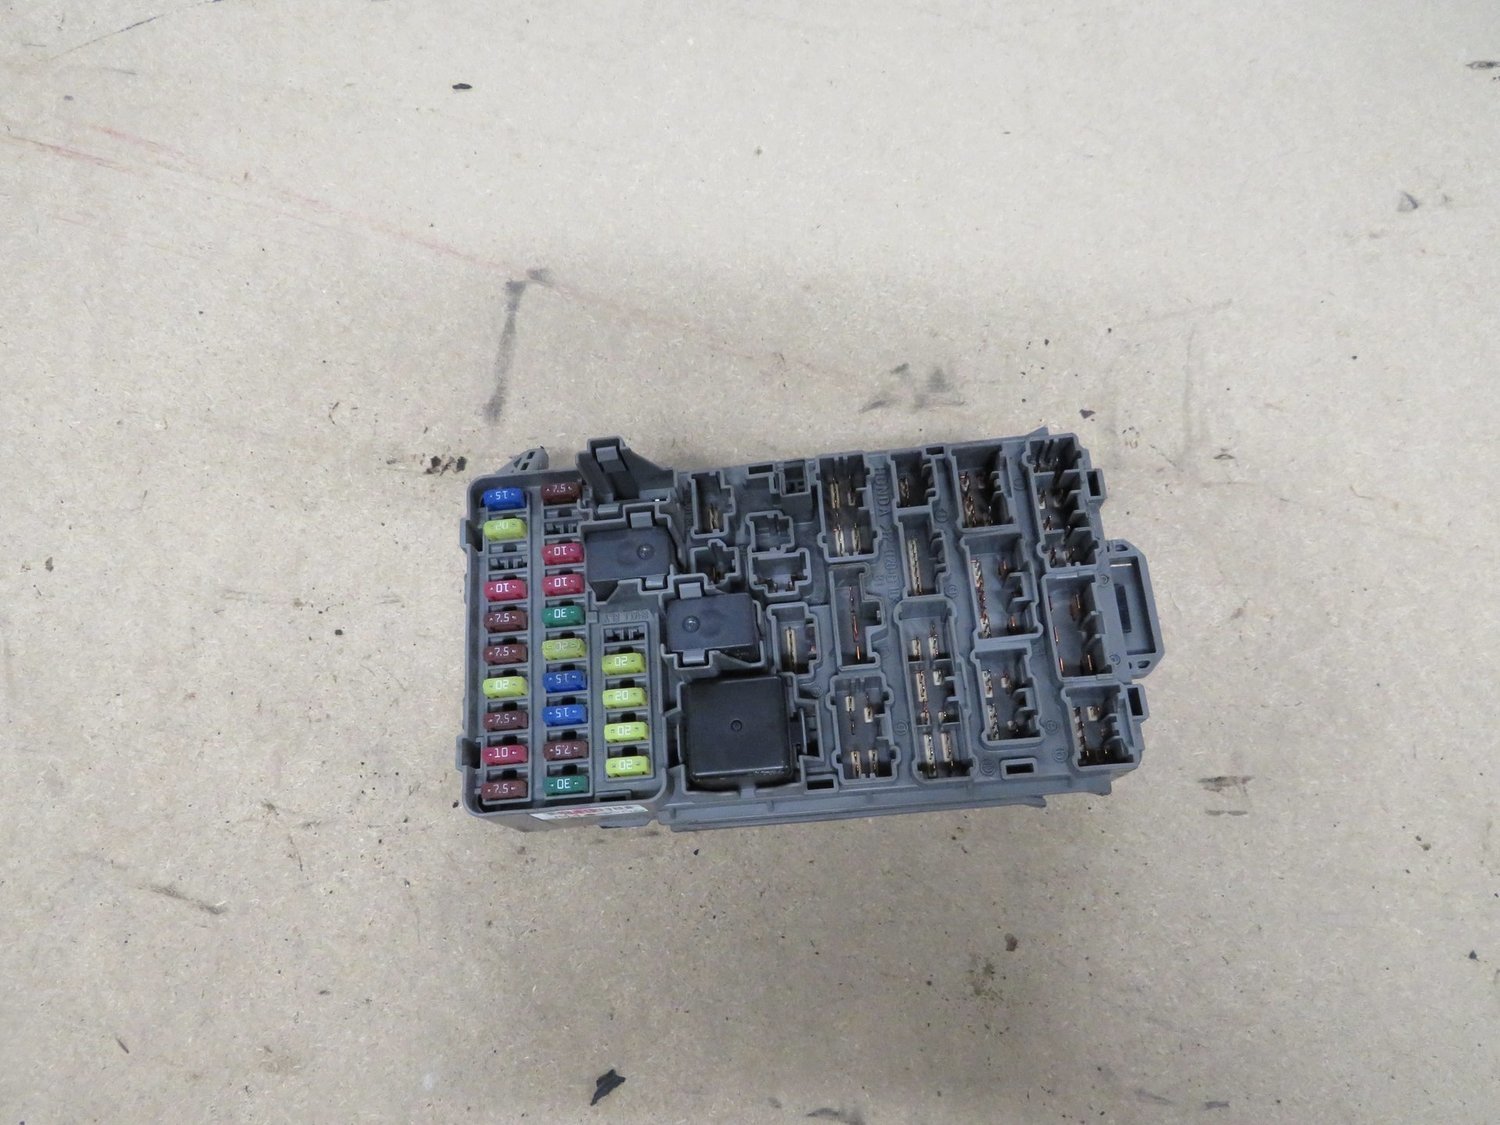 Honda EP3 Civic Type R Dash main Fuse box with all Fuses and Relays